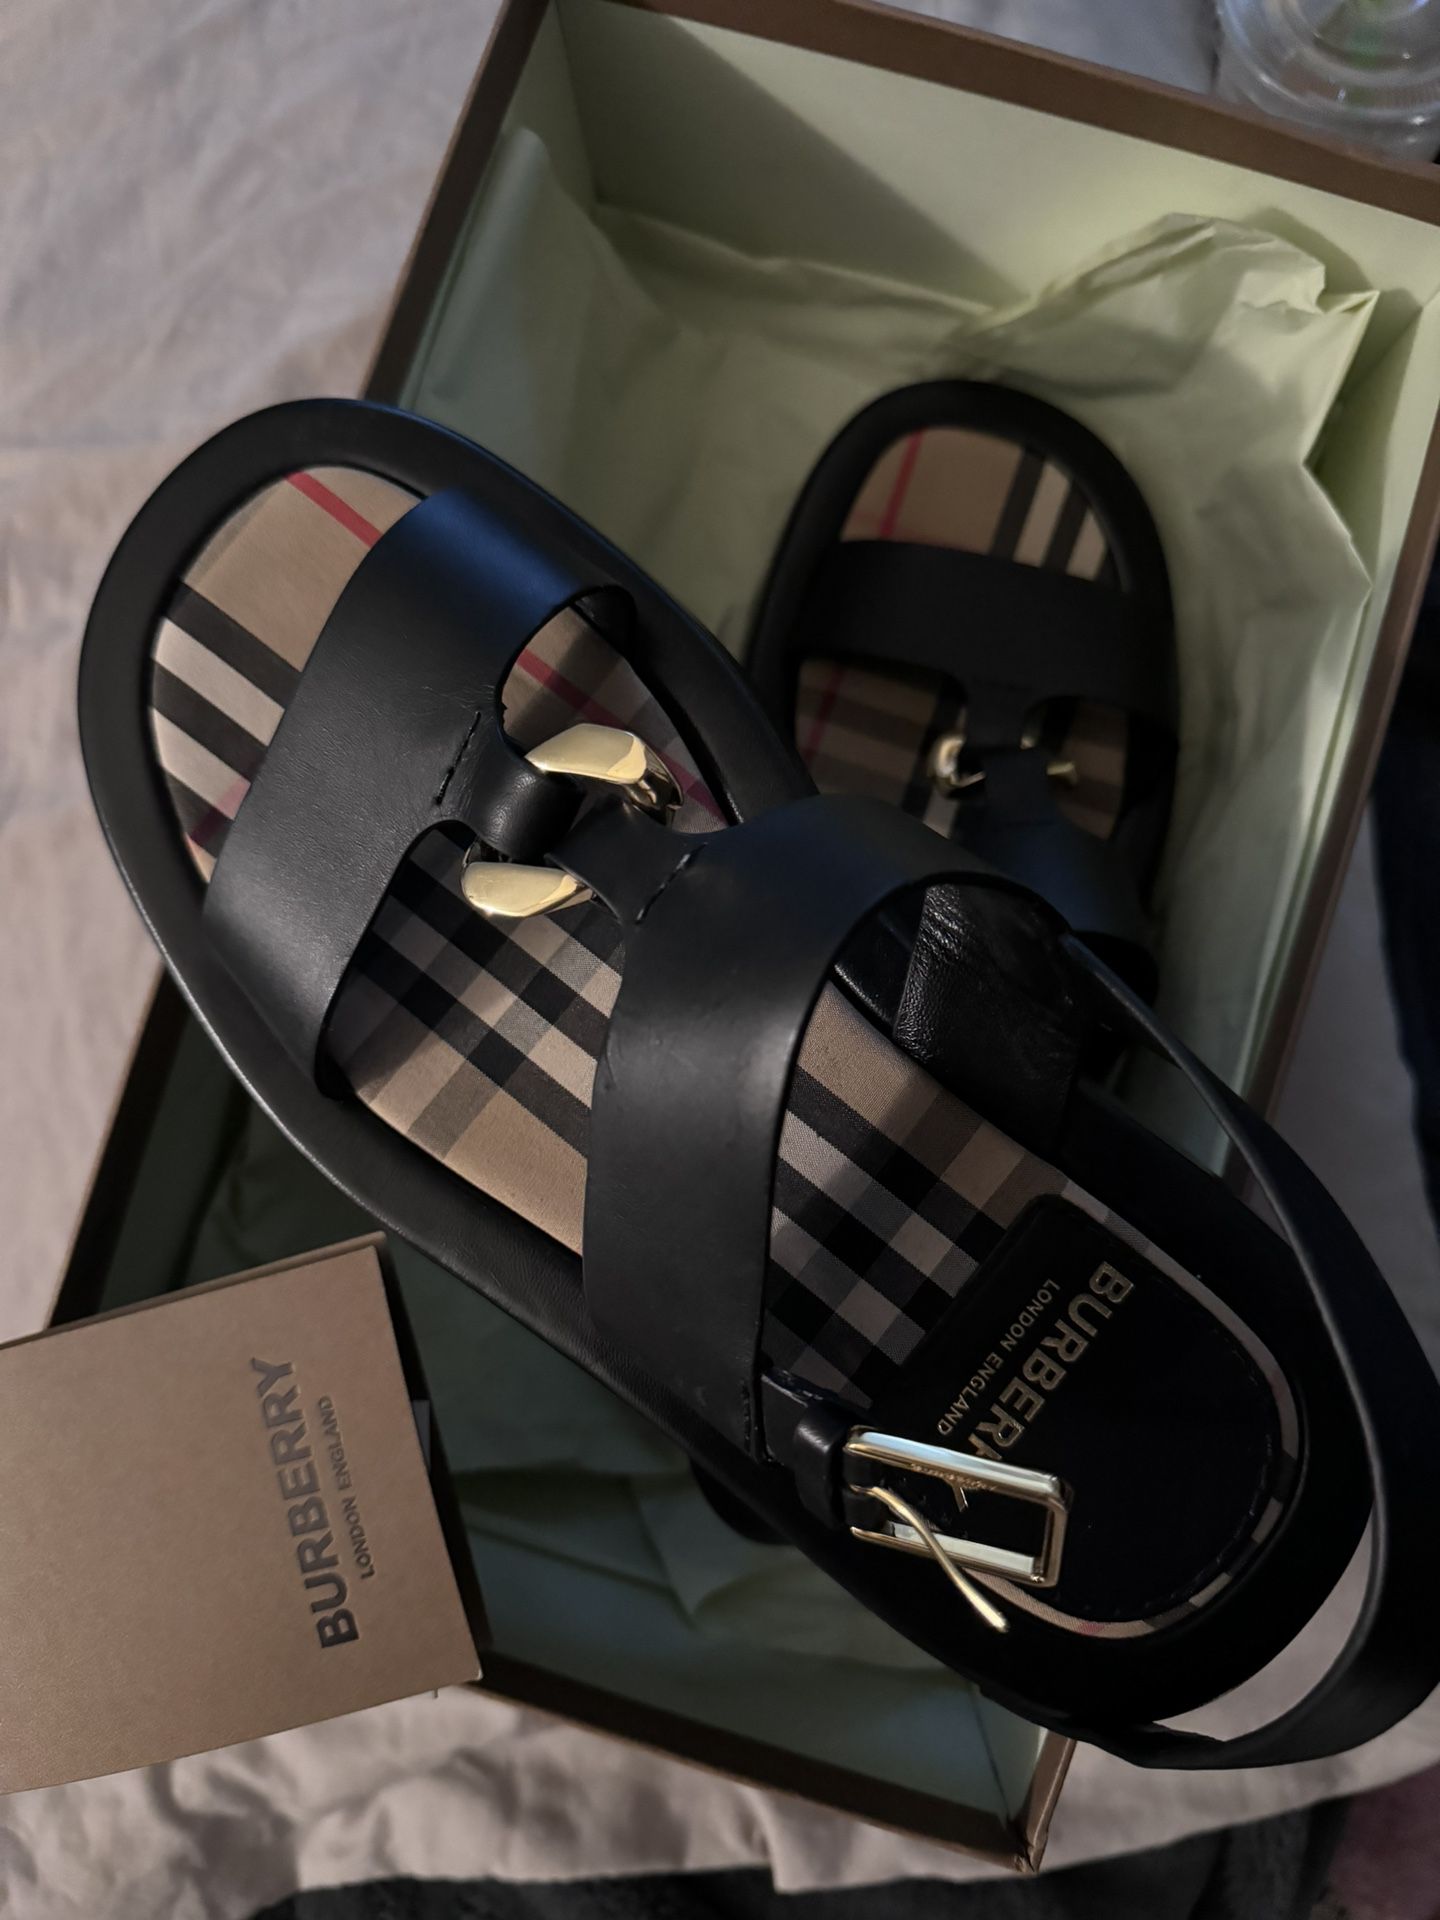 Burberry Woman’s Sandals 